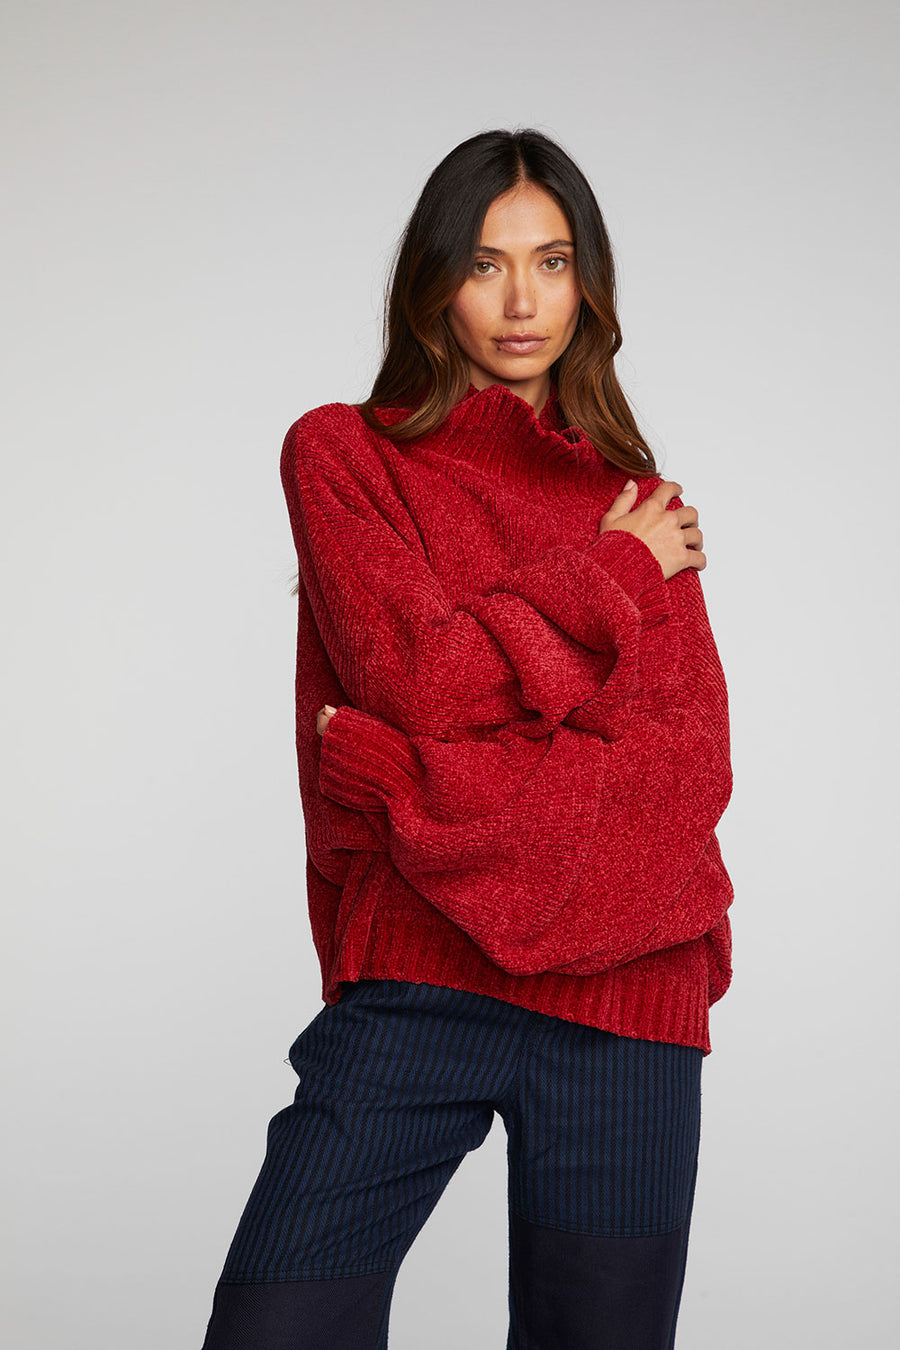 Chenille Sweater Knit Turtleneck Womens chaserbrand